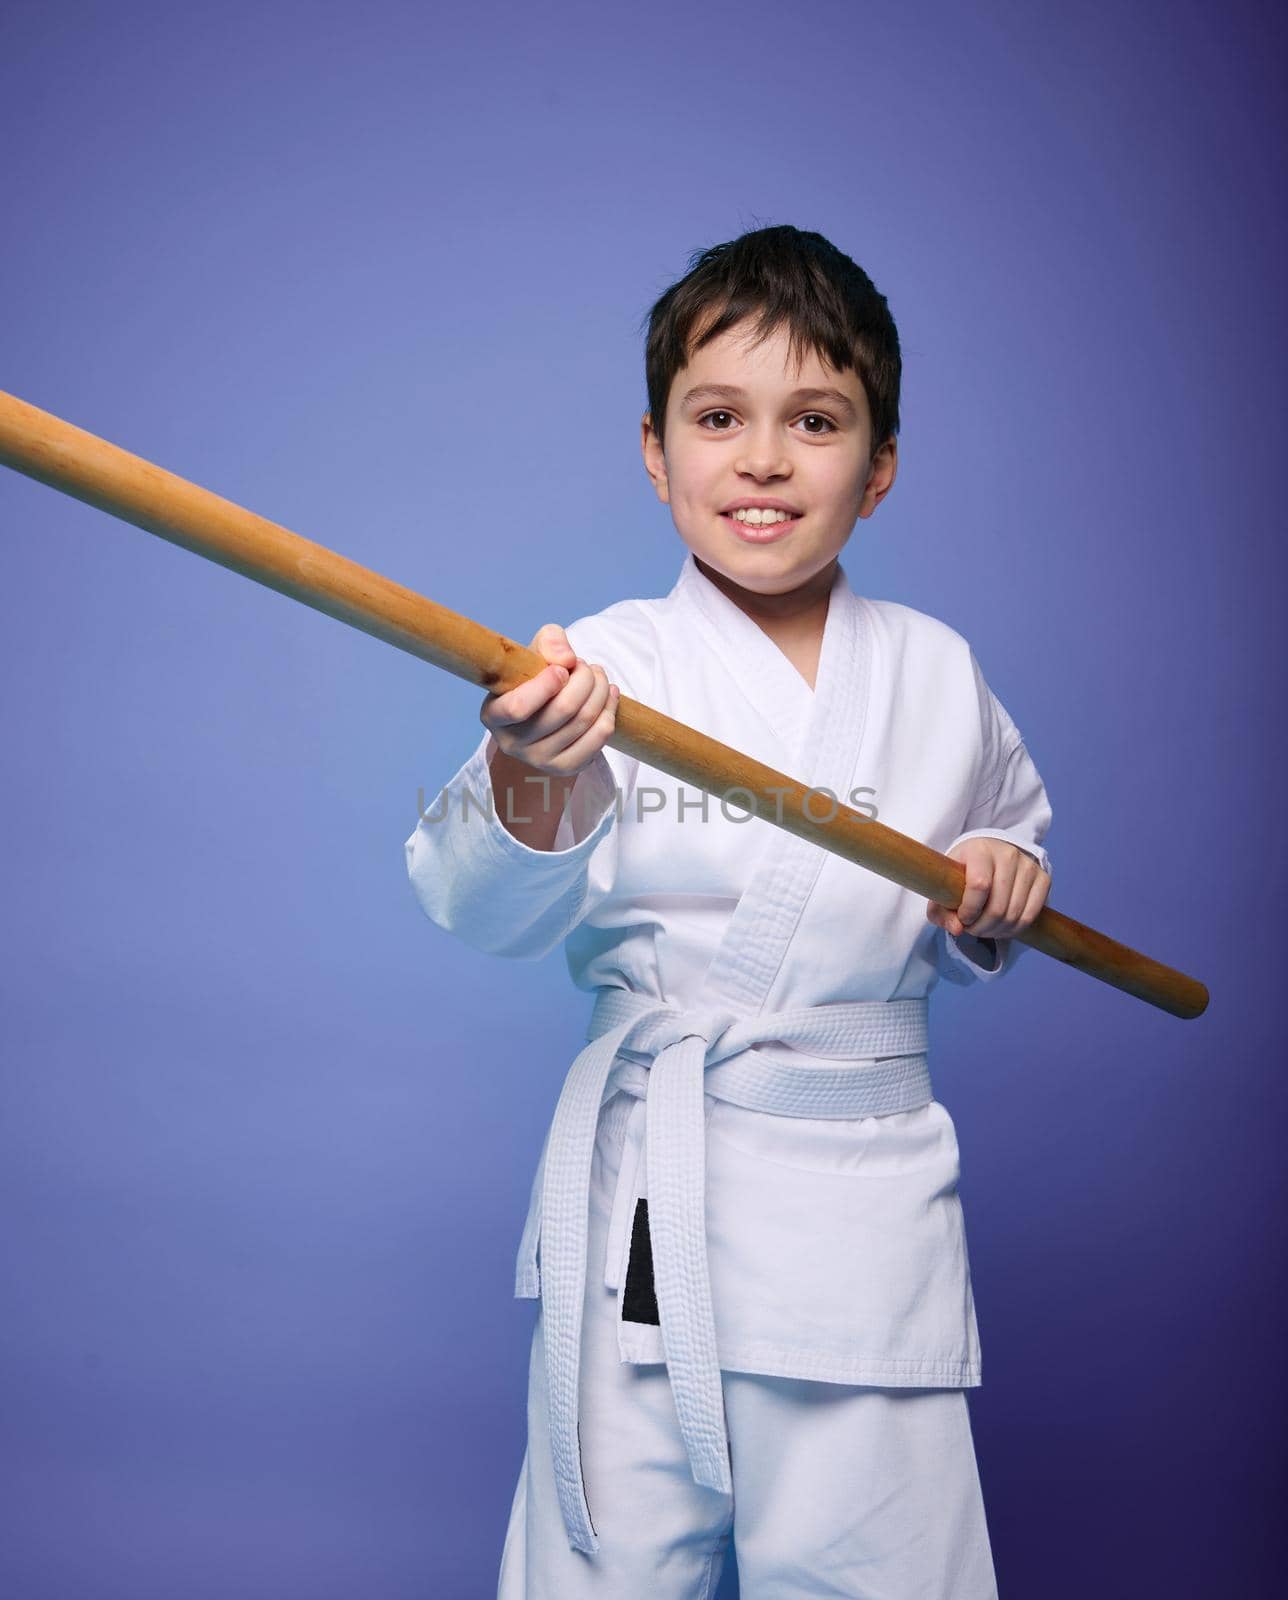 Confident strong concentrated boy - Aikido wrestler - in a kimono stands with a wooden jo weapon in his hands. Oriental martial arts practice concept